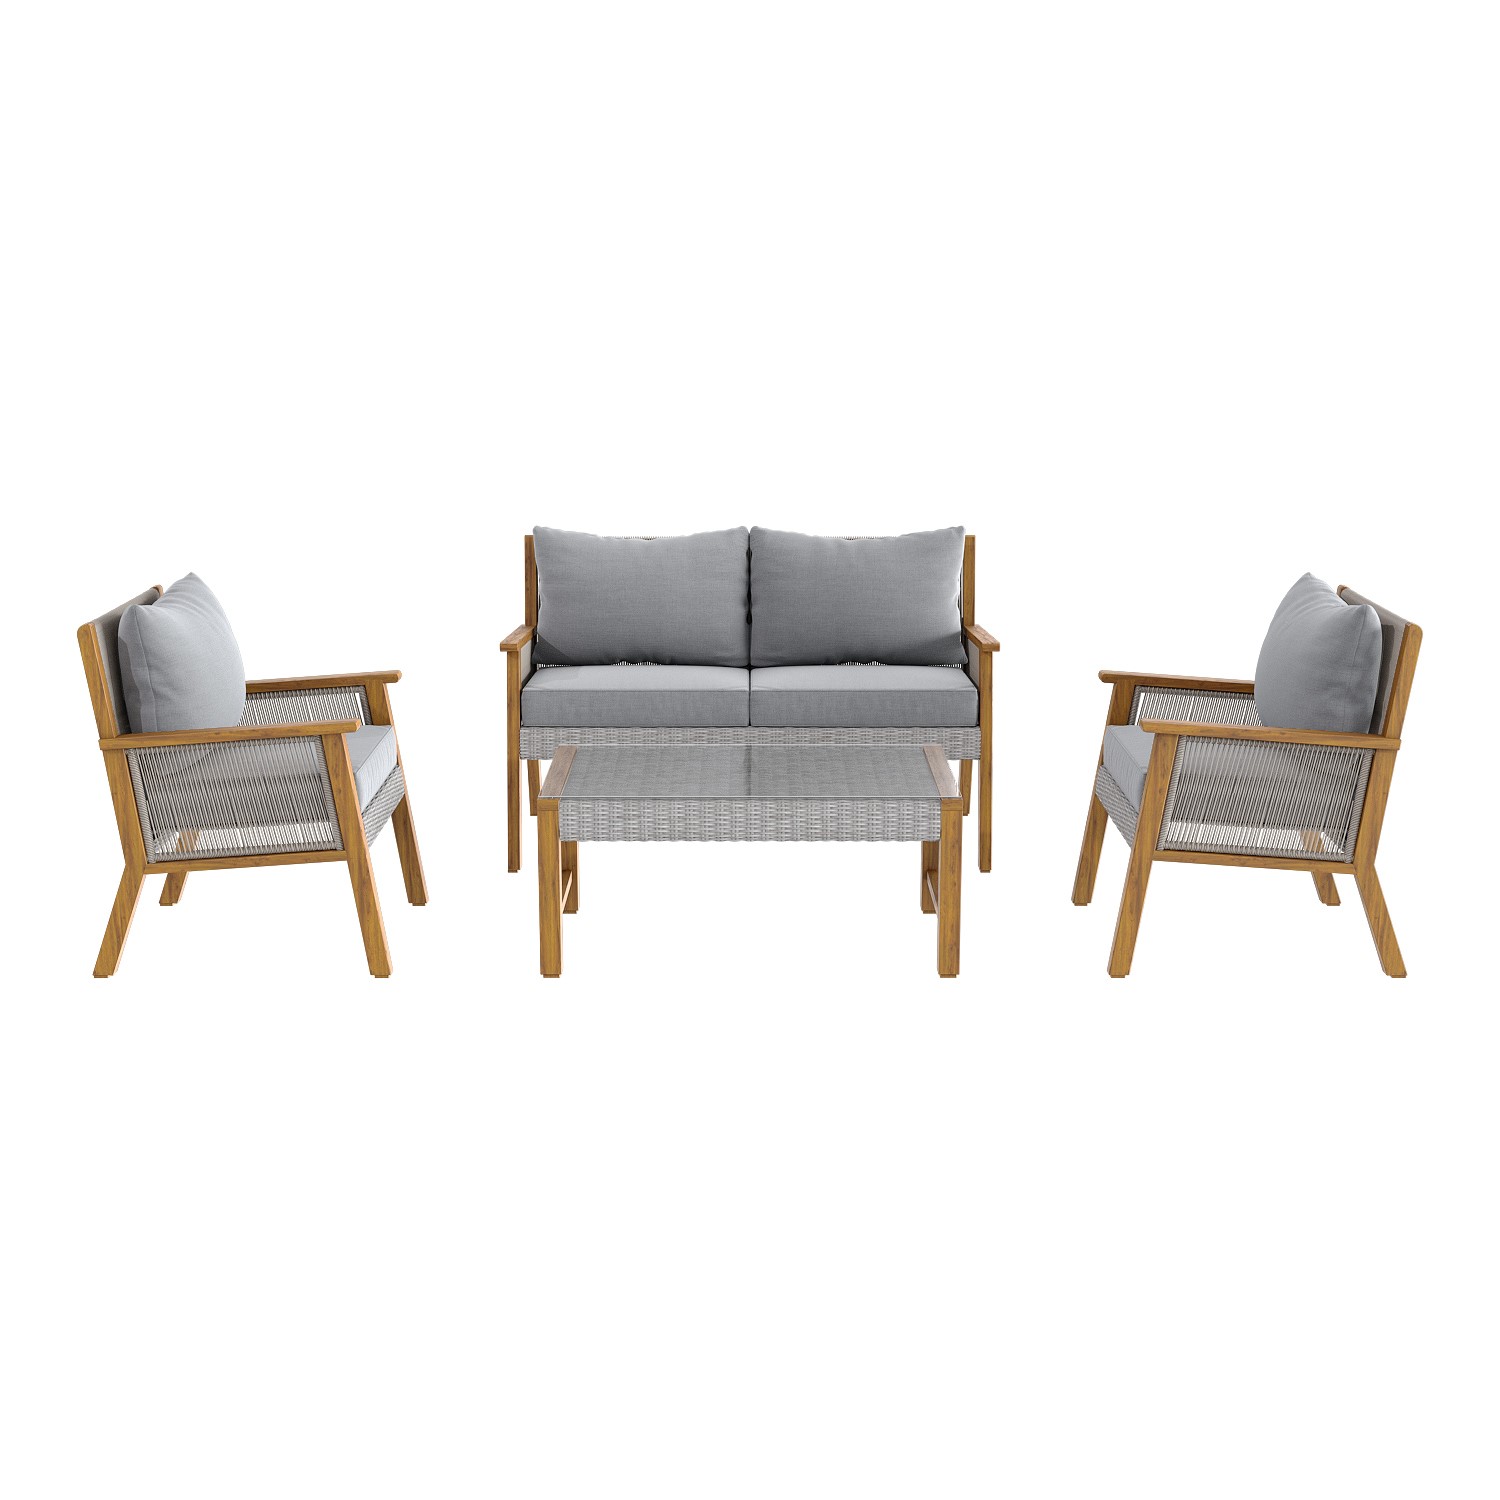 Read more about 4 seater grey rattan garden sofa set with solid wood frame aspen